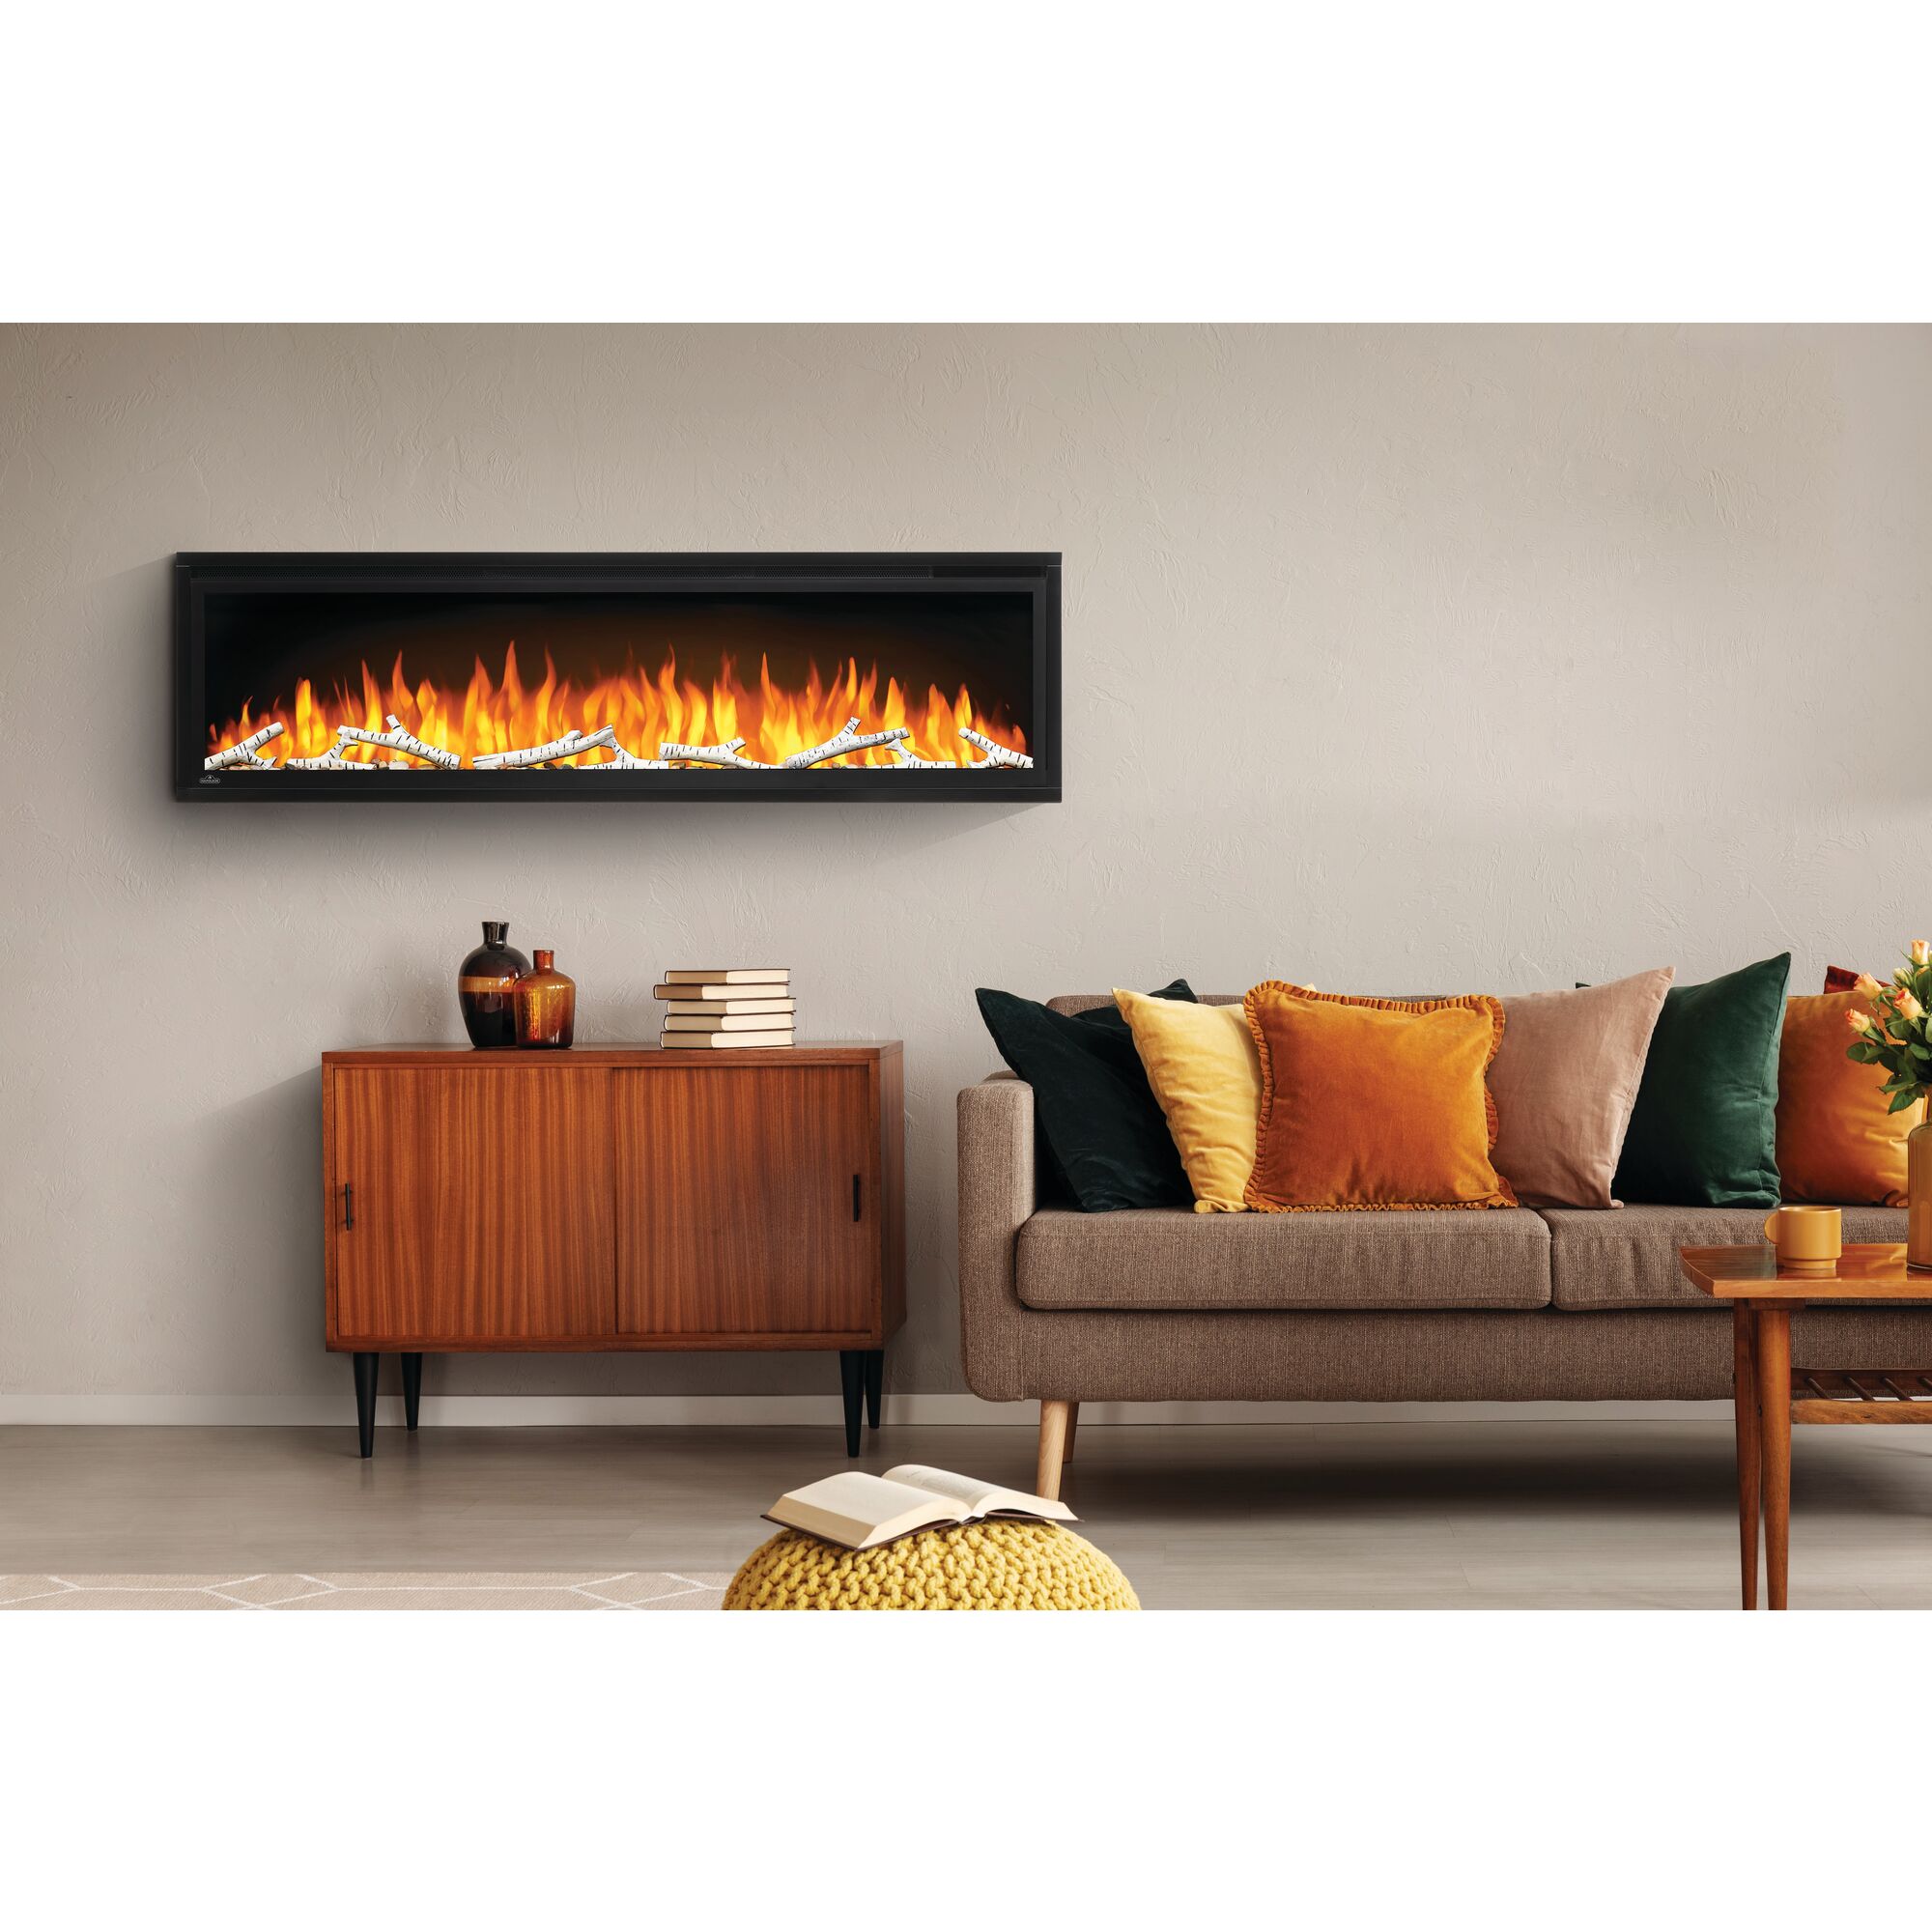 Image Napoleon Entice 42 inches eletric fireplace                                                                                                           